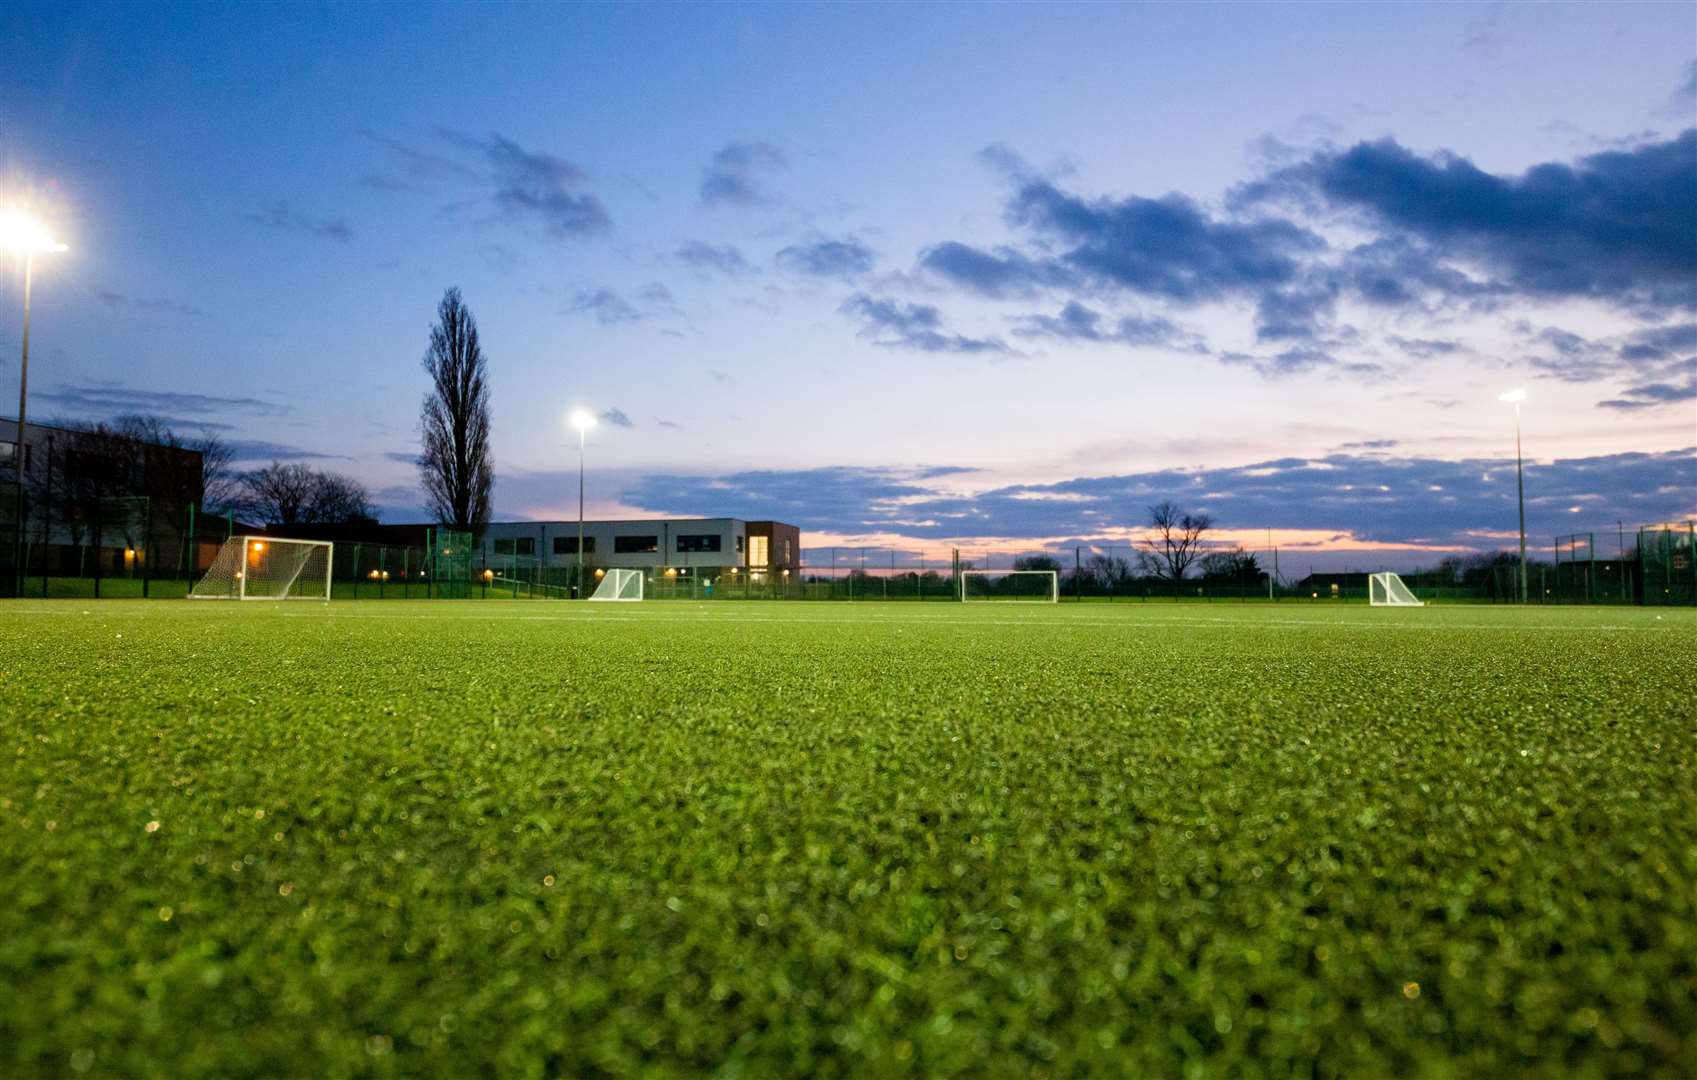 Pitchside enjoyed a £100,000 refurbishment last year – but is now remaining closed for the foreseeable future. Picture: Ashford Borough Council